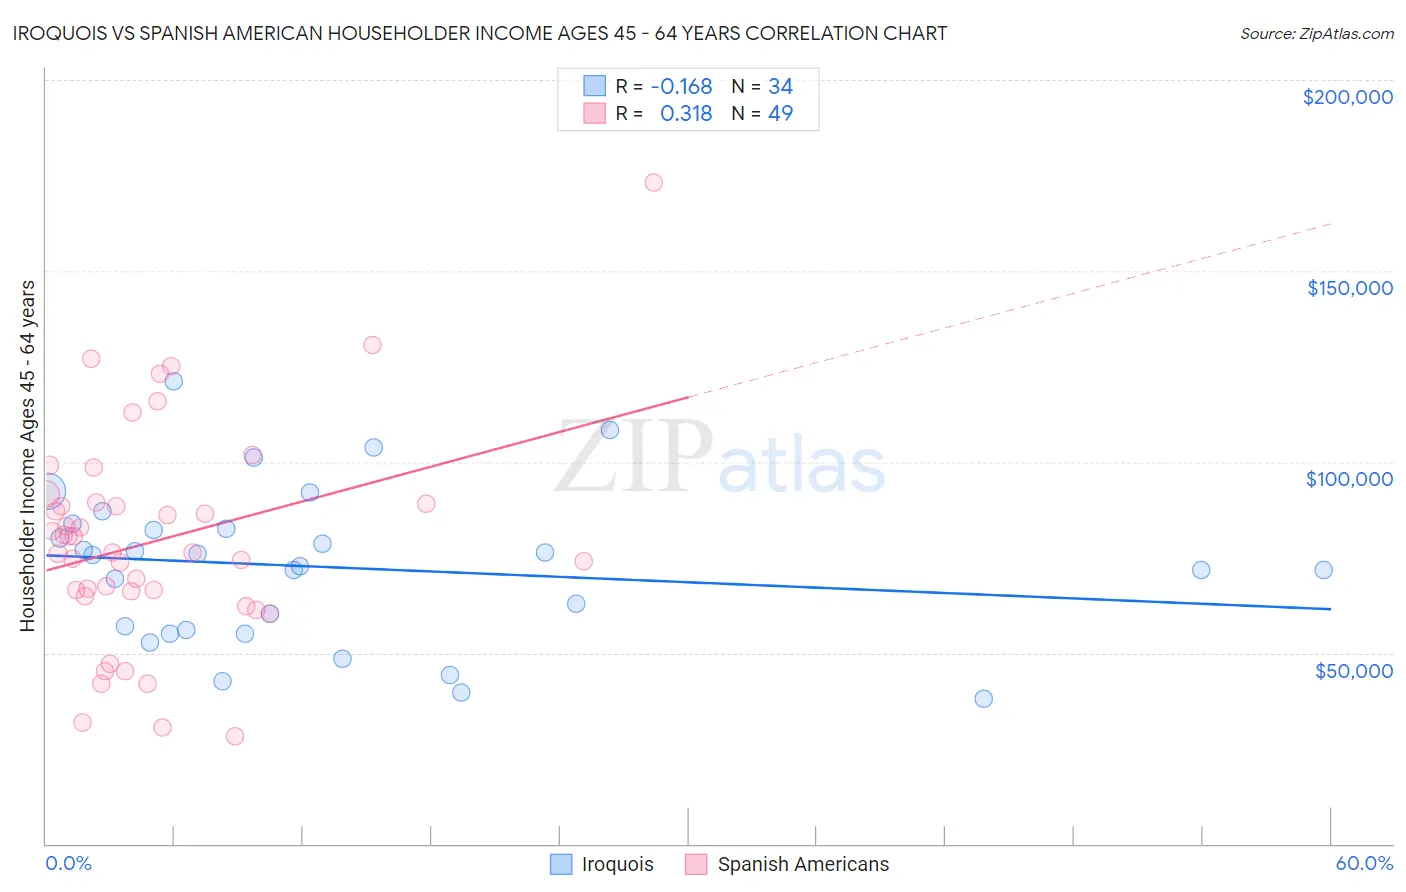 Iroquois vs Spanish American Householder Income Ages 45 - 64 years